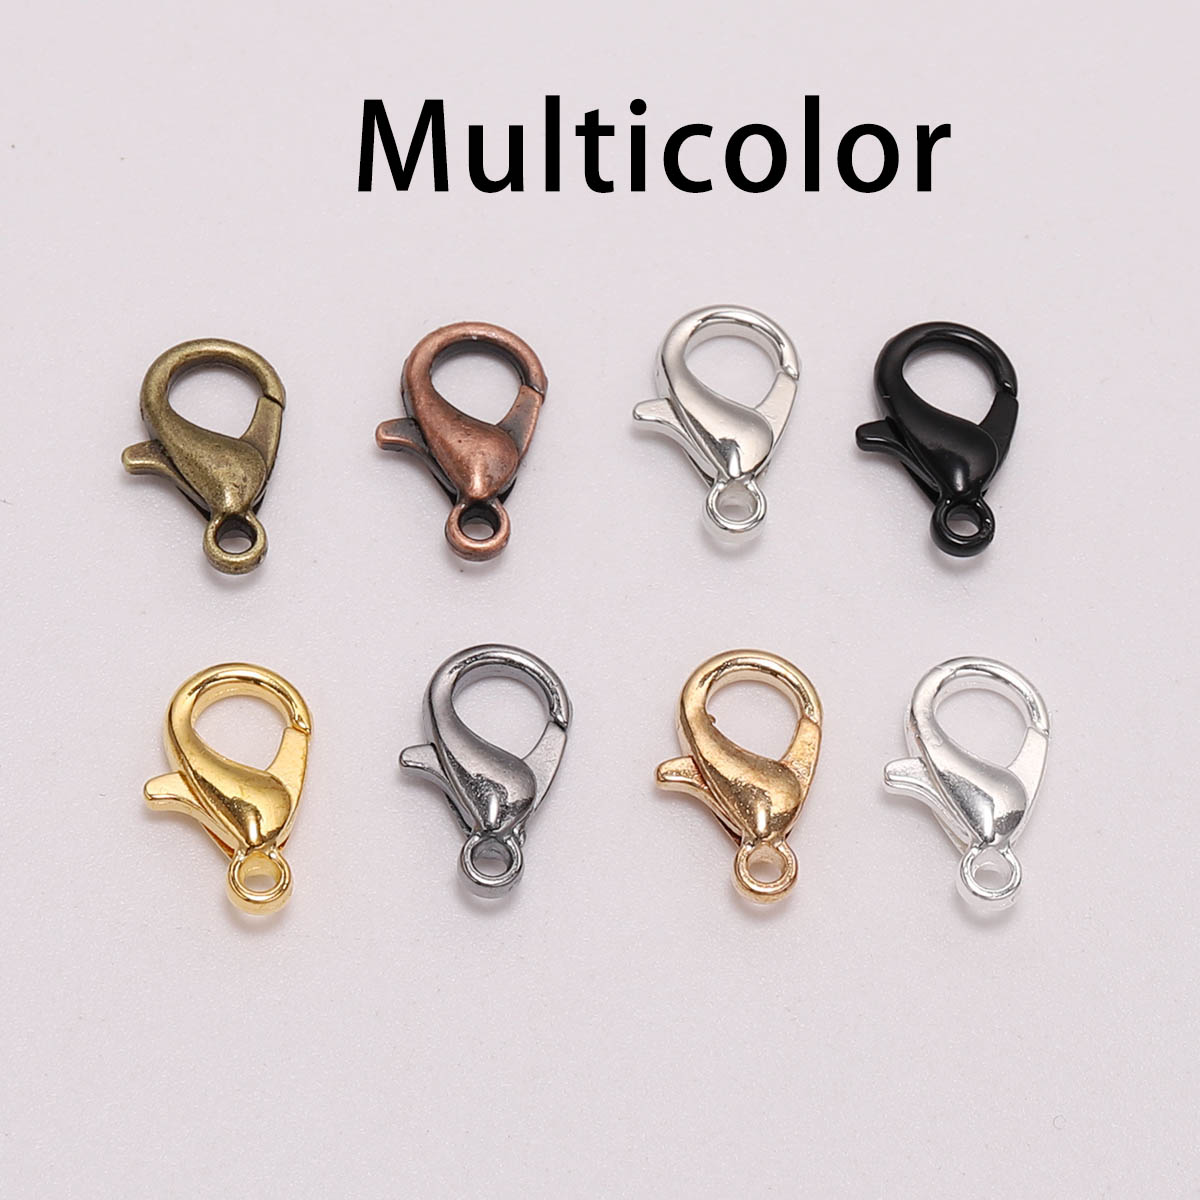 50pcs/lot Jewelry Findings,Alloy Lobster Clasp Hooks for Necklace Bracelet  Chain DIY (Color : Gun Black, Size : 14x7mm)